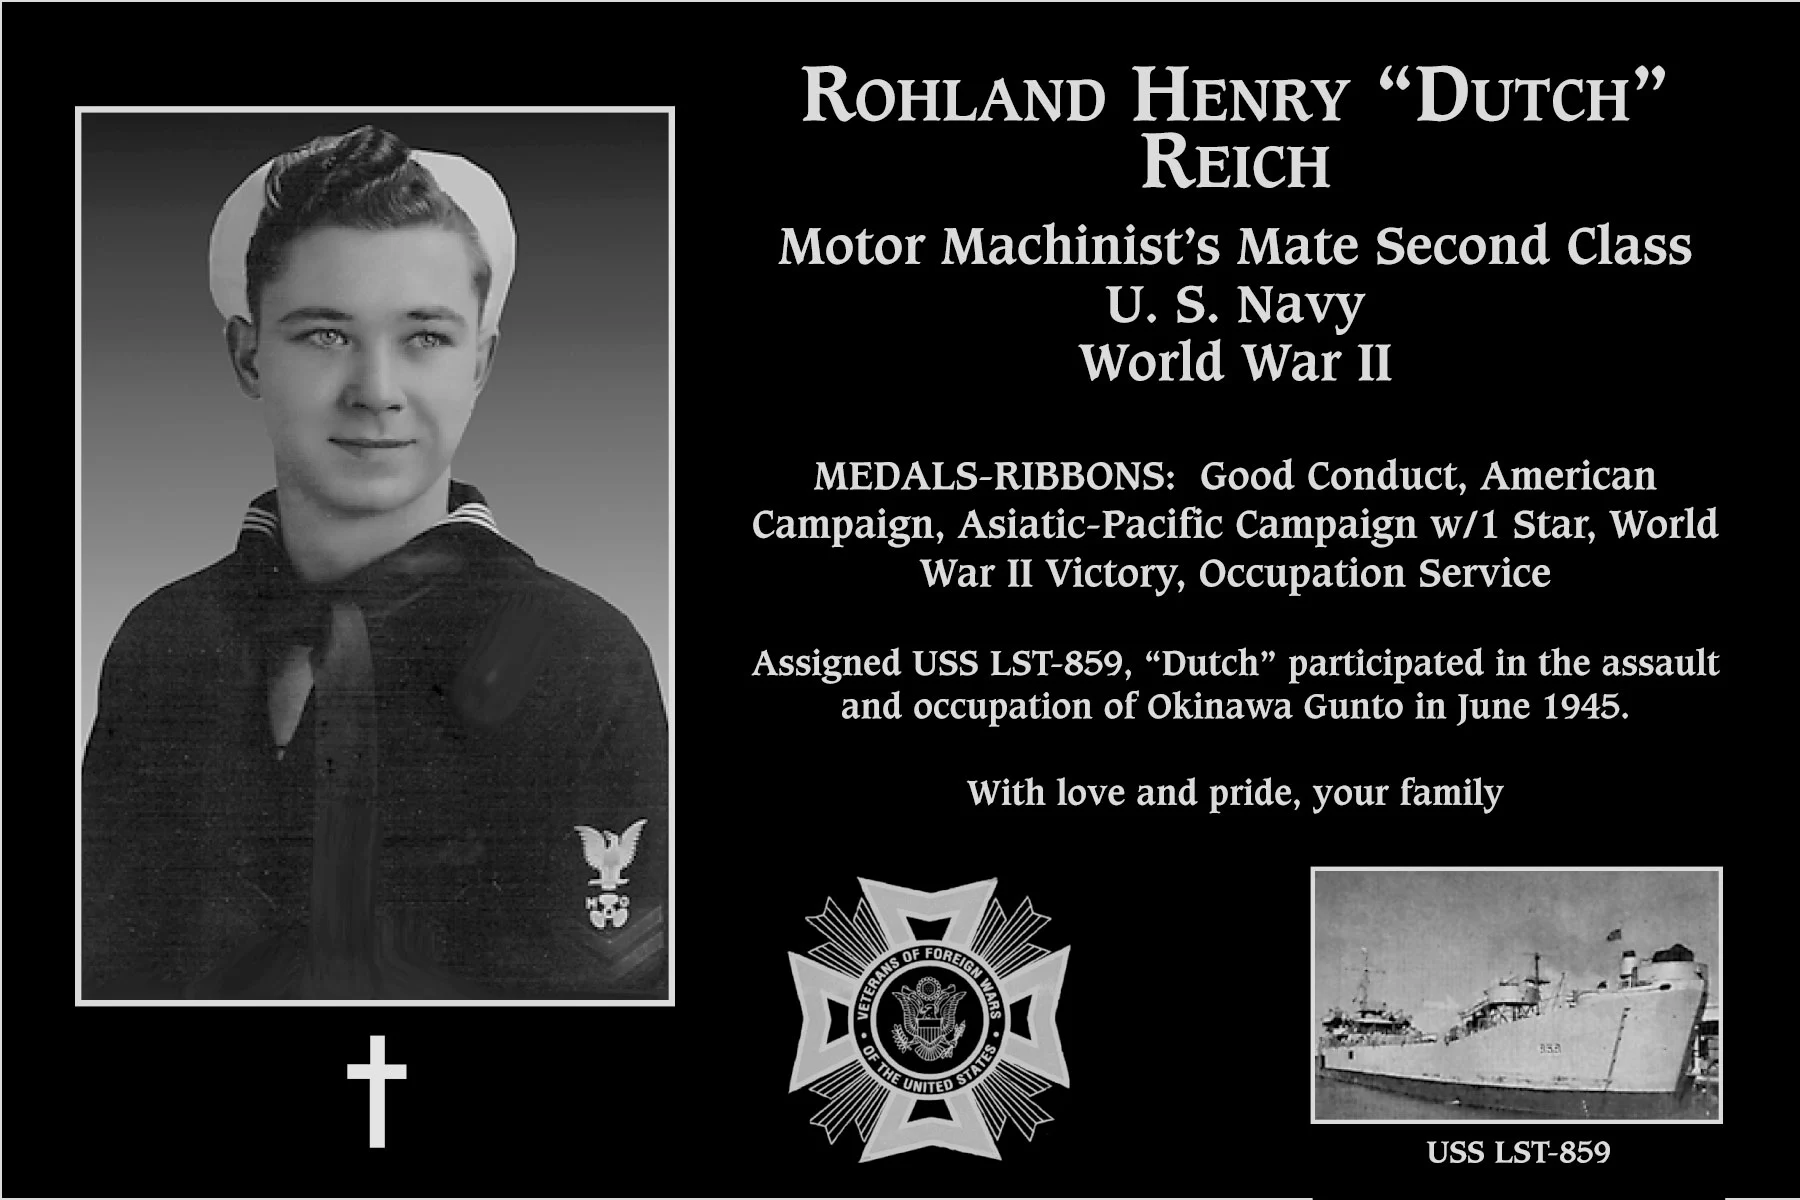 Rohland Henry Reich